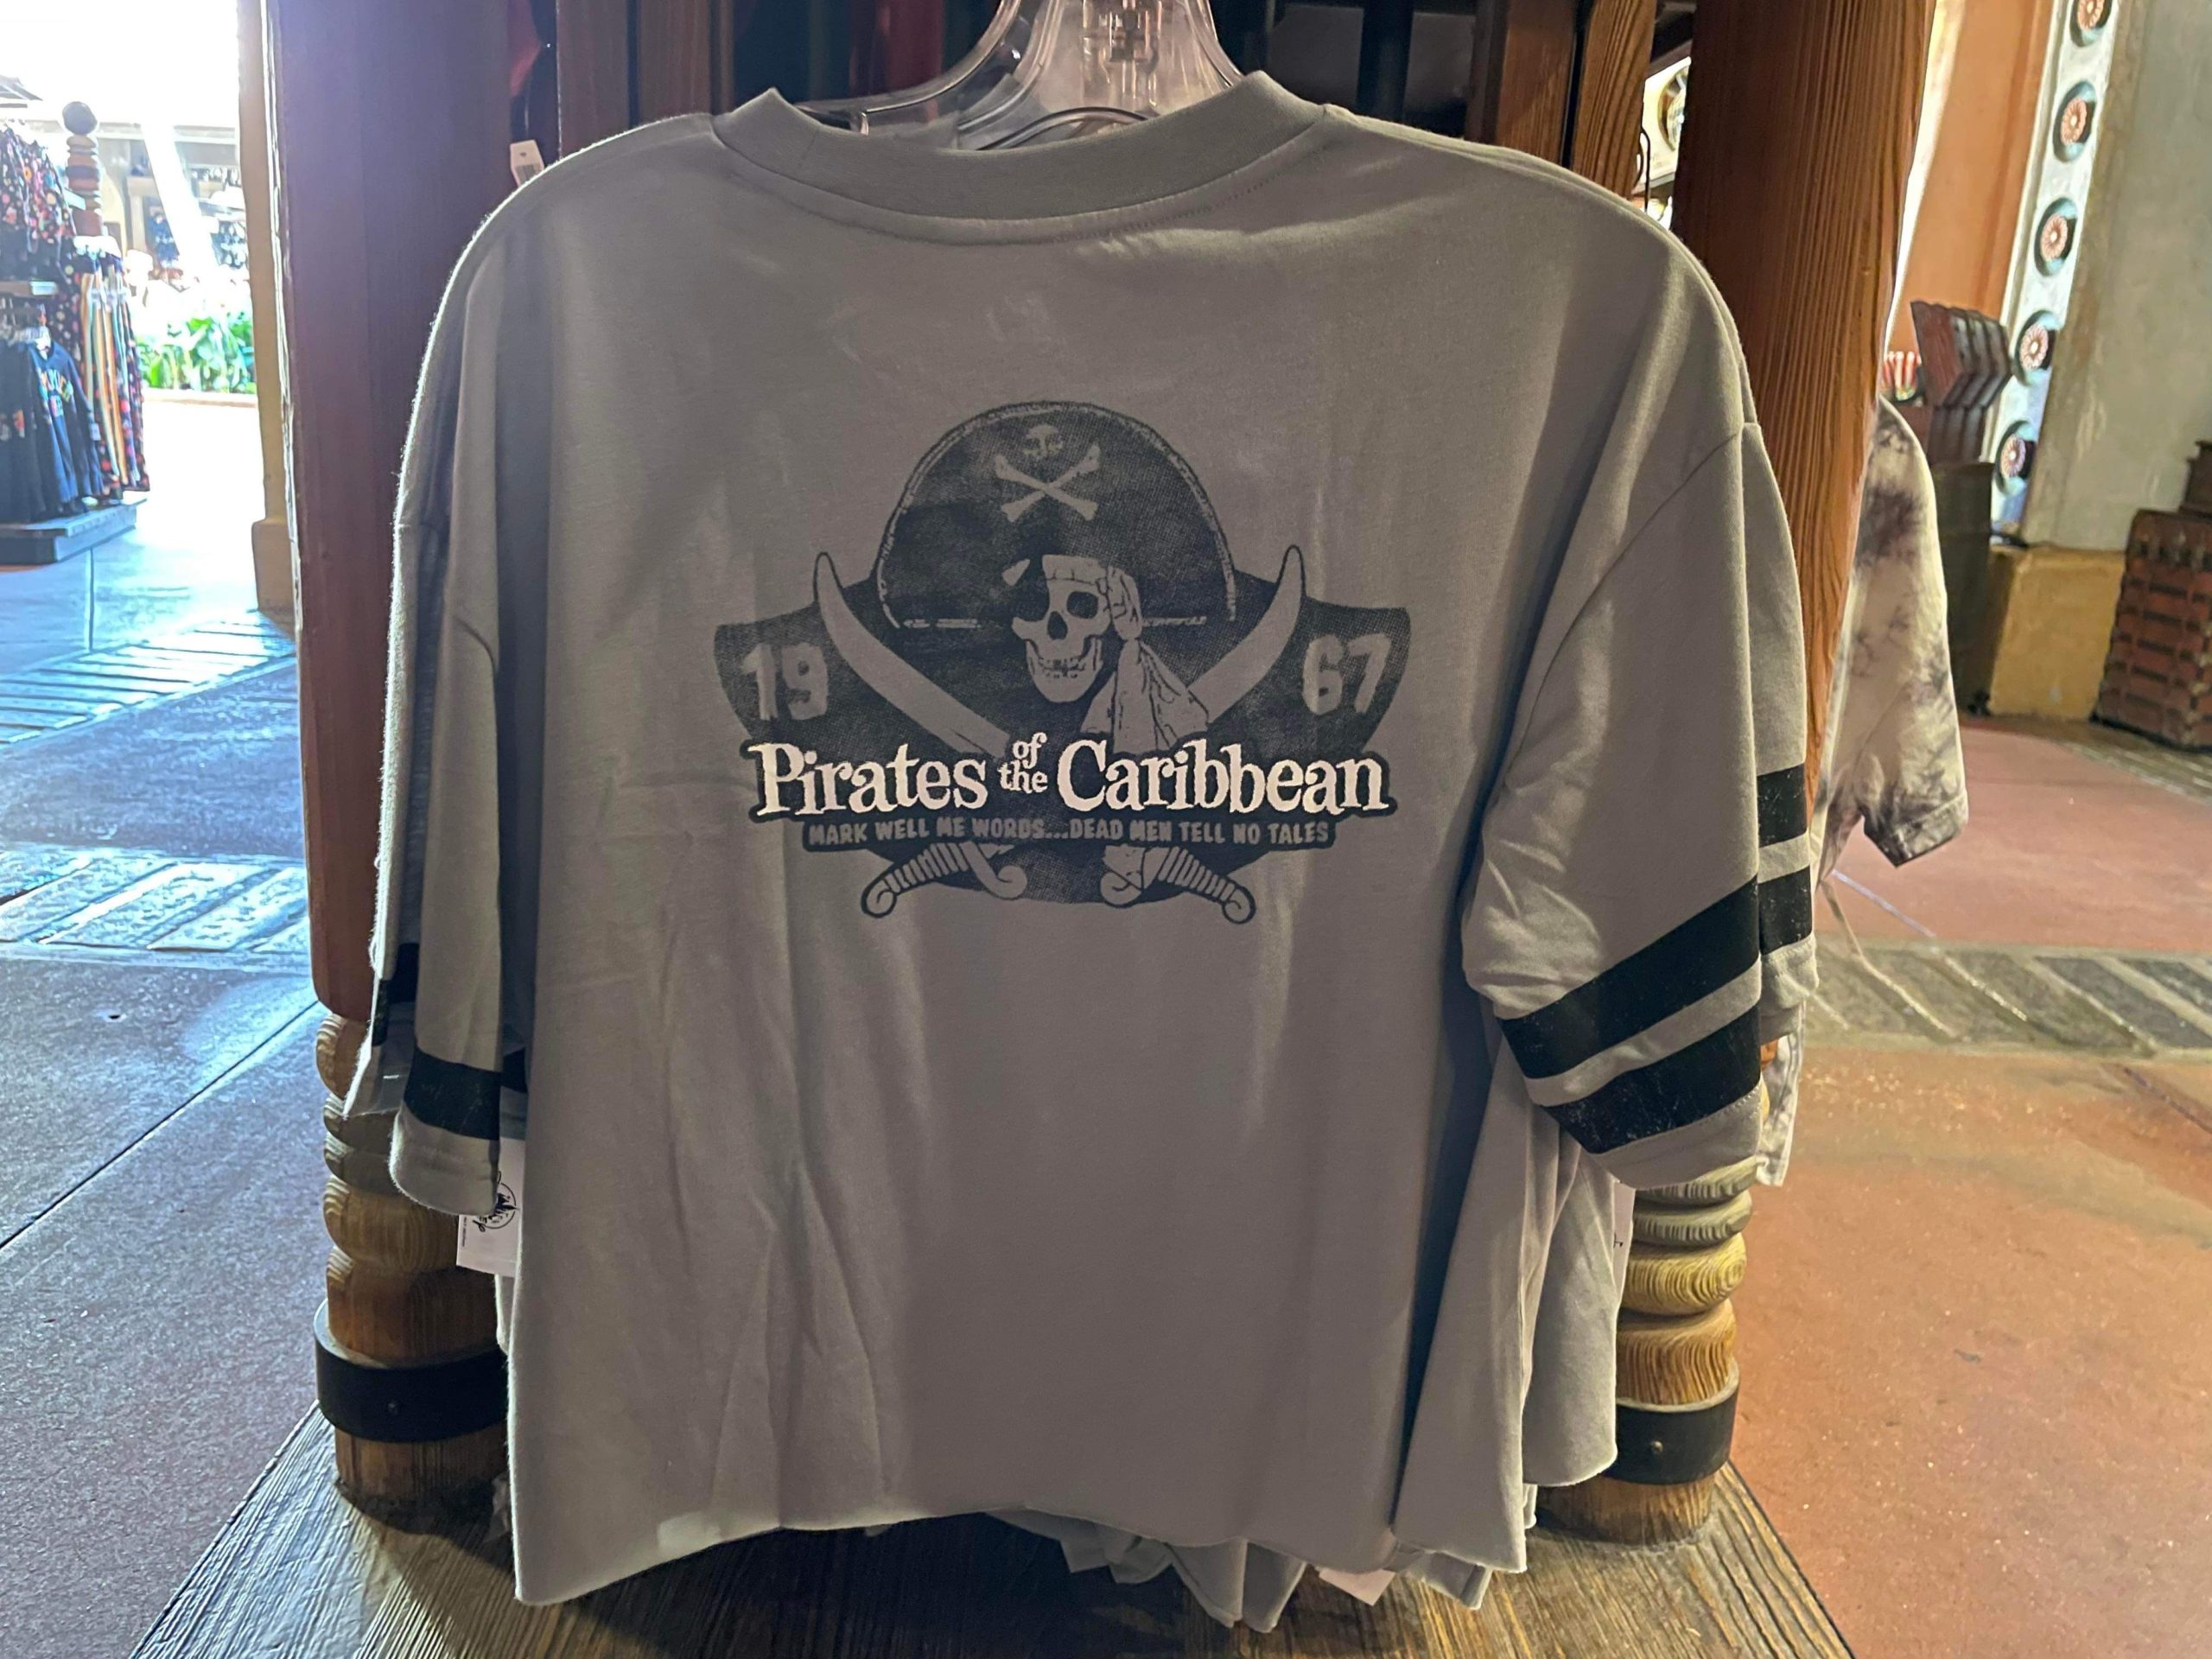 Impress Your Mateys with New Pirates of the Caribbean Shirt! 